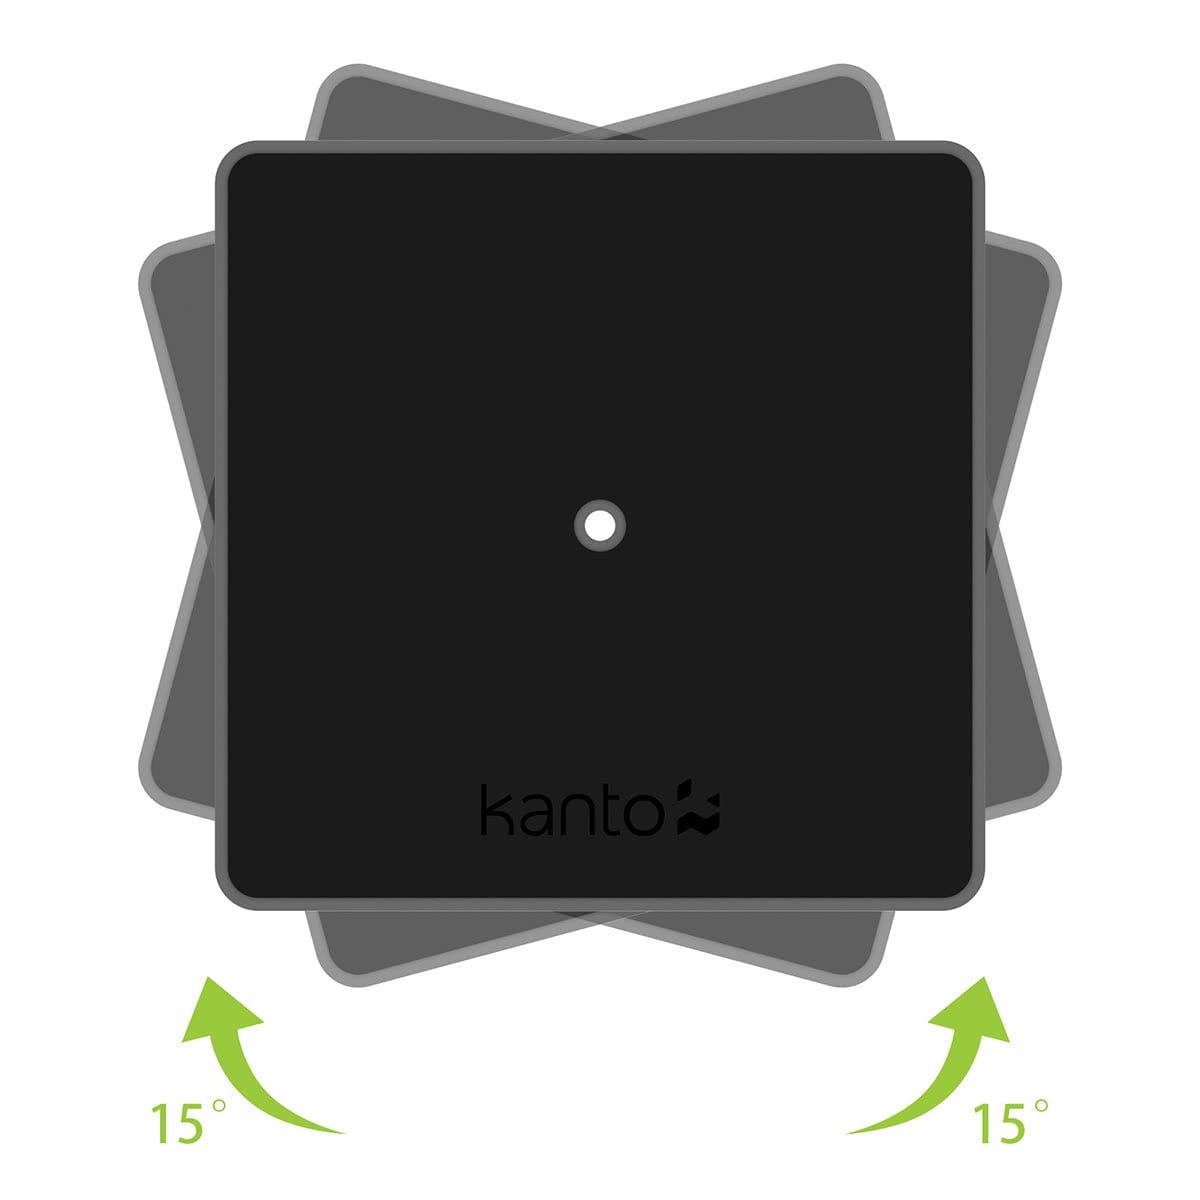 Kanto SP6HD 6" Universal Desktop Speaker Stands with Rotating Top Plates and Cable Management - Pair (Black)